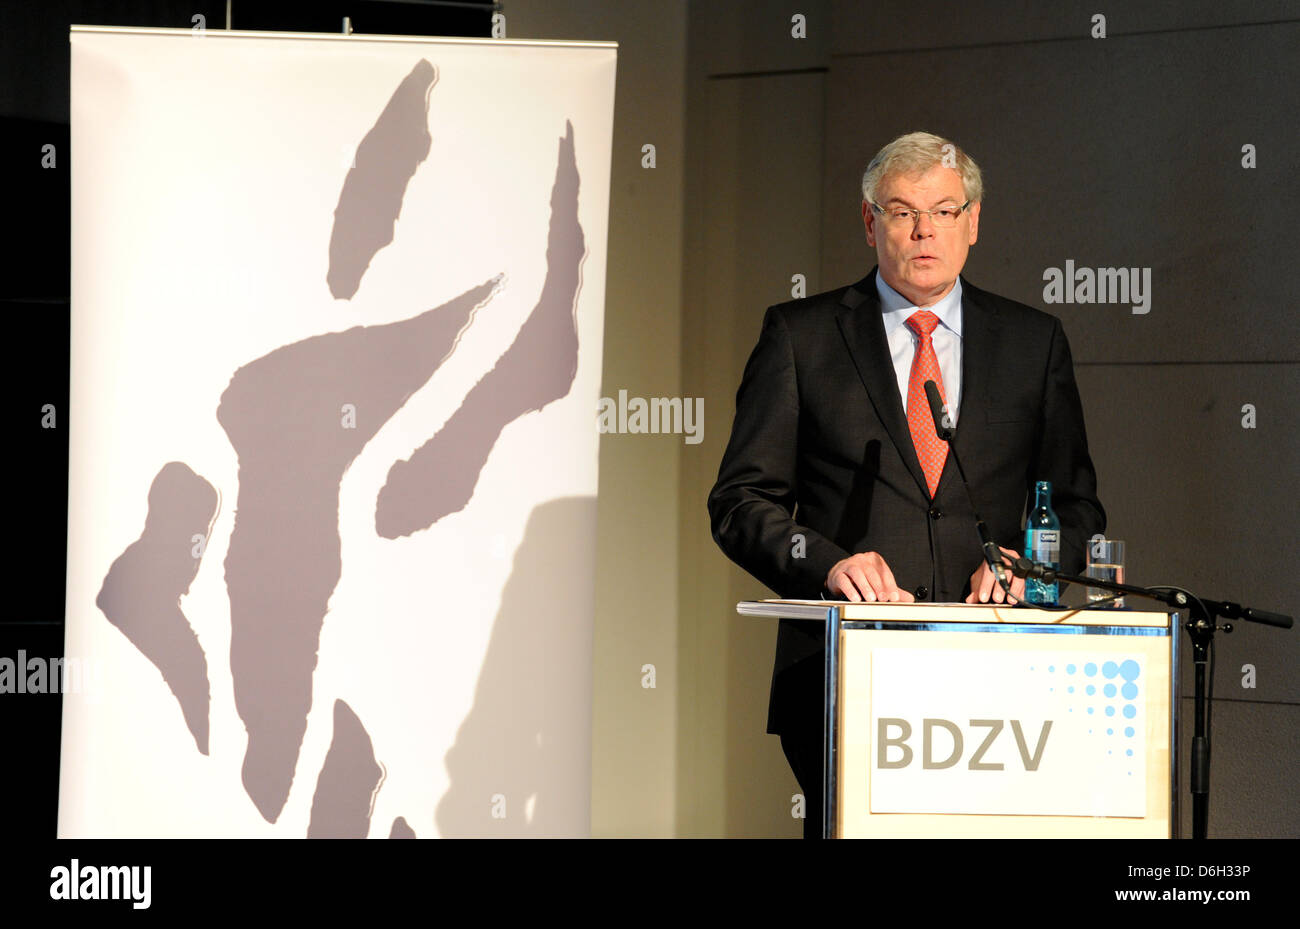 Helmut Heinen, president of the Federation of German Newspaper Publishers, talks during the awarding of the Citizen's Prize to the artist couple Birgit and Horst Lohmeyer in Berlin, Germany, 29 February 2012. The Lohmeyers received the Citizen's Prize (Buergerpreis) of the Federation of German Newspaper Publishers for their steadfastness against right-wing extremism. Photo: Maurizi Stock Photo